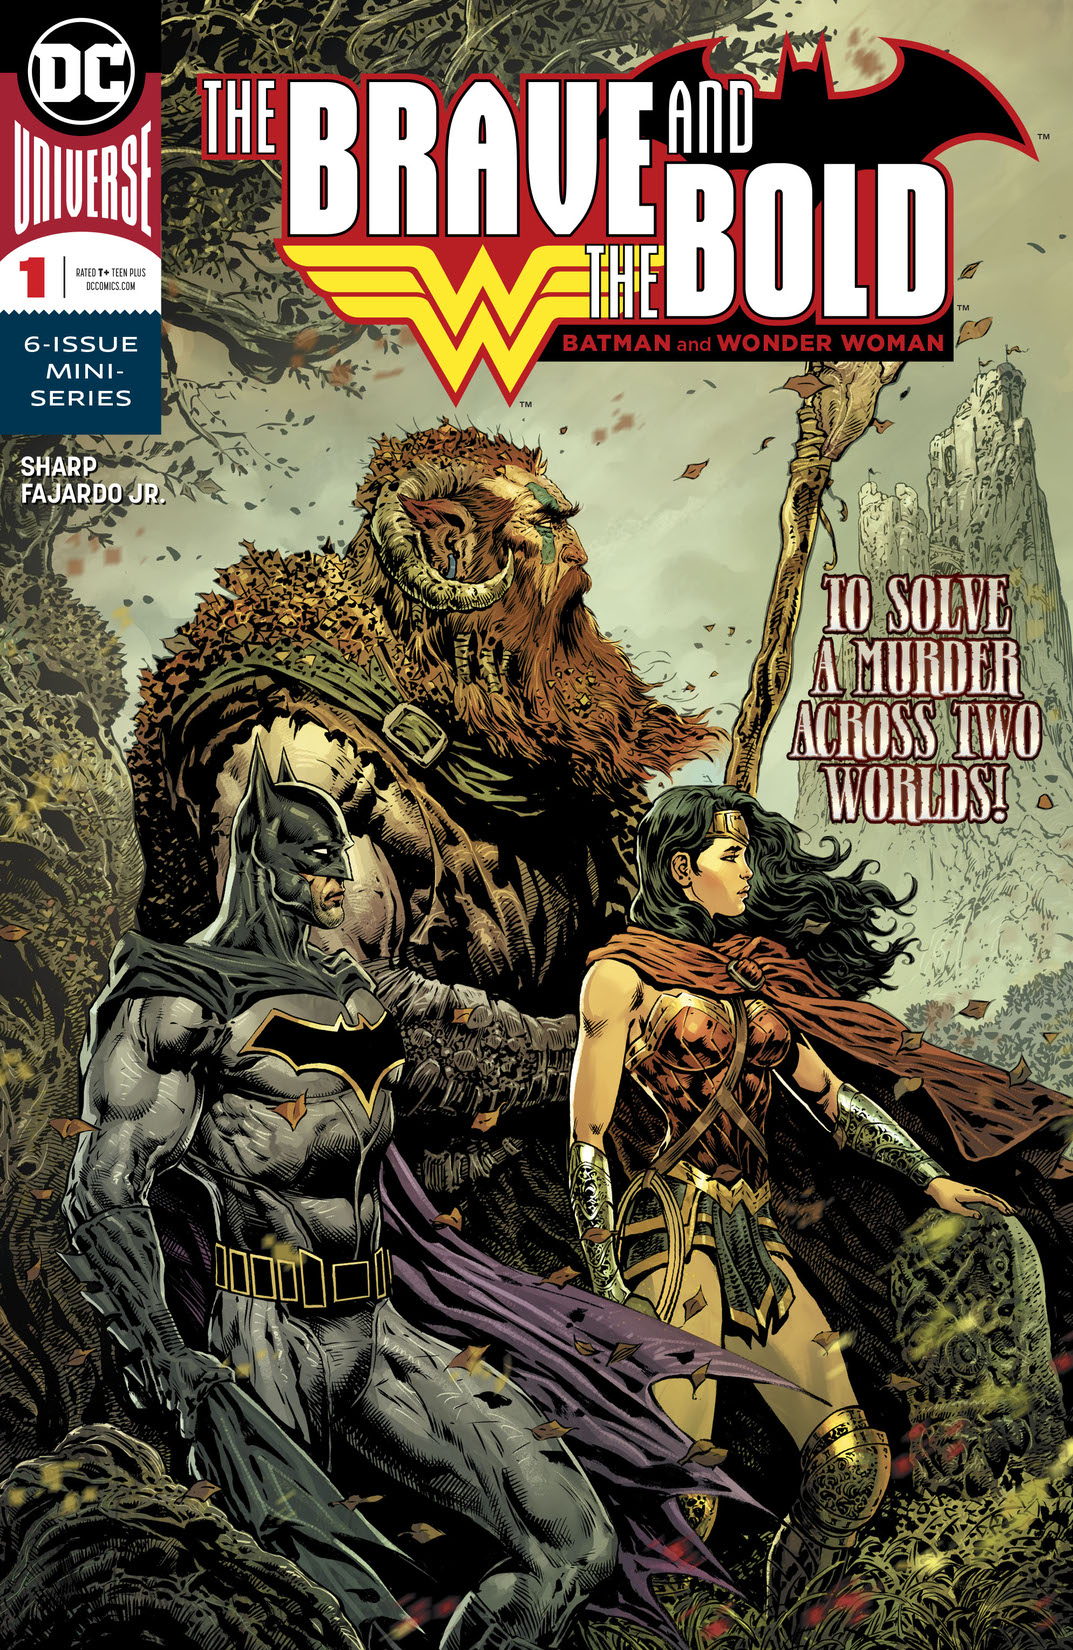 The Brave and the Bold: Batman and Wonder Woman #1 preview images